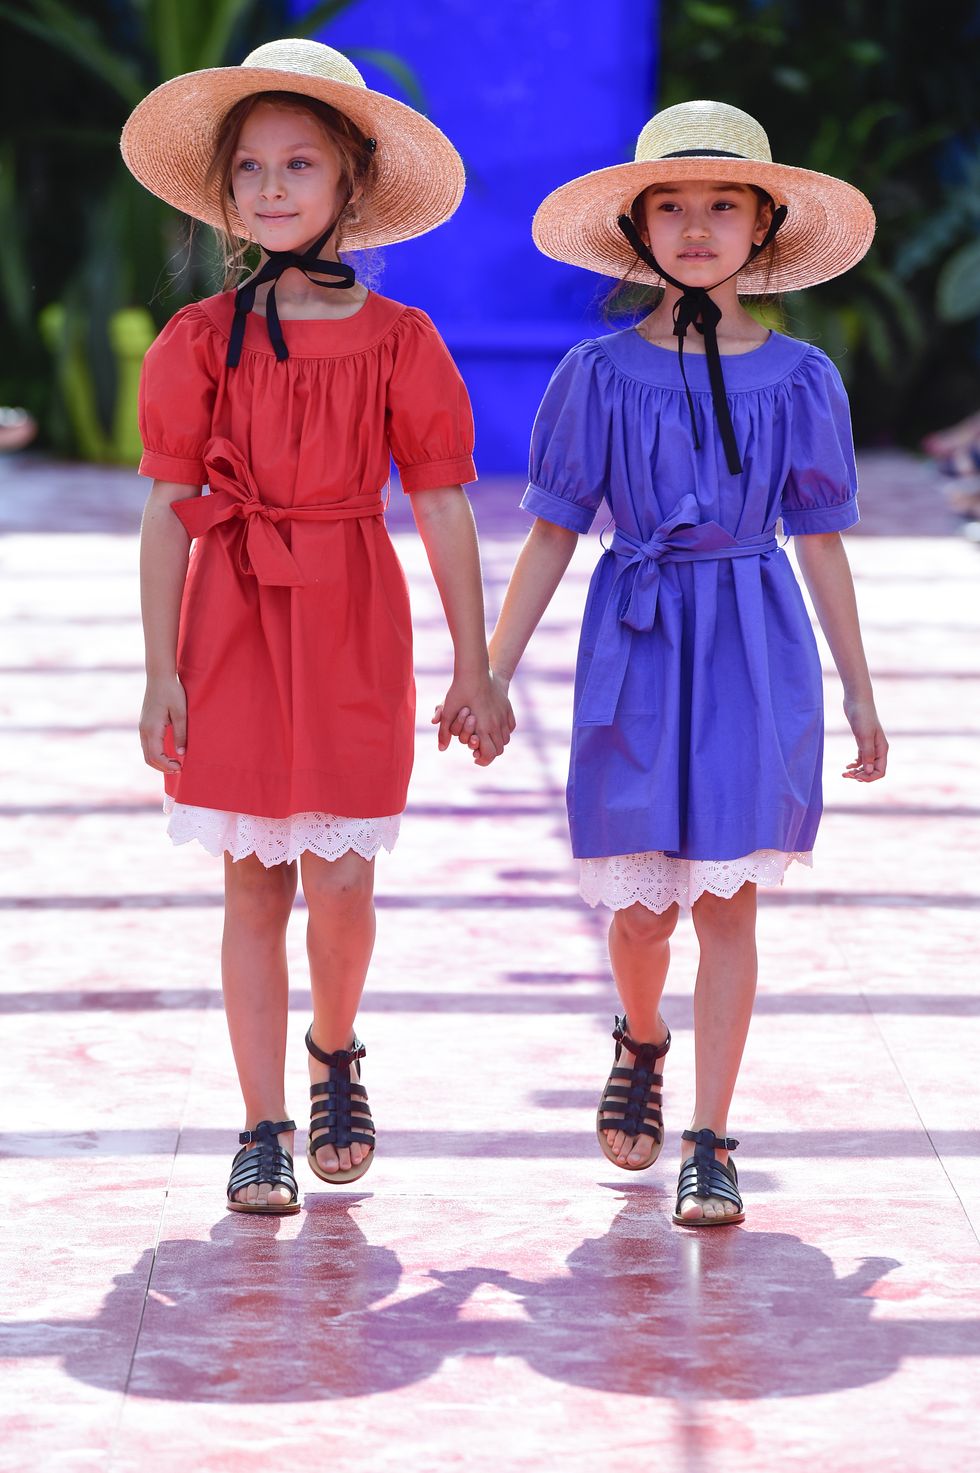 Fashion, Clothing, Blue, Red, Pink, Child, Purple, Spring, Child model, Summer, 